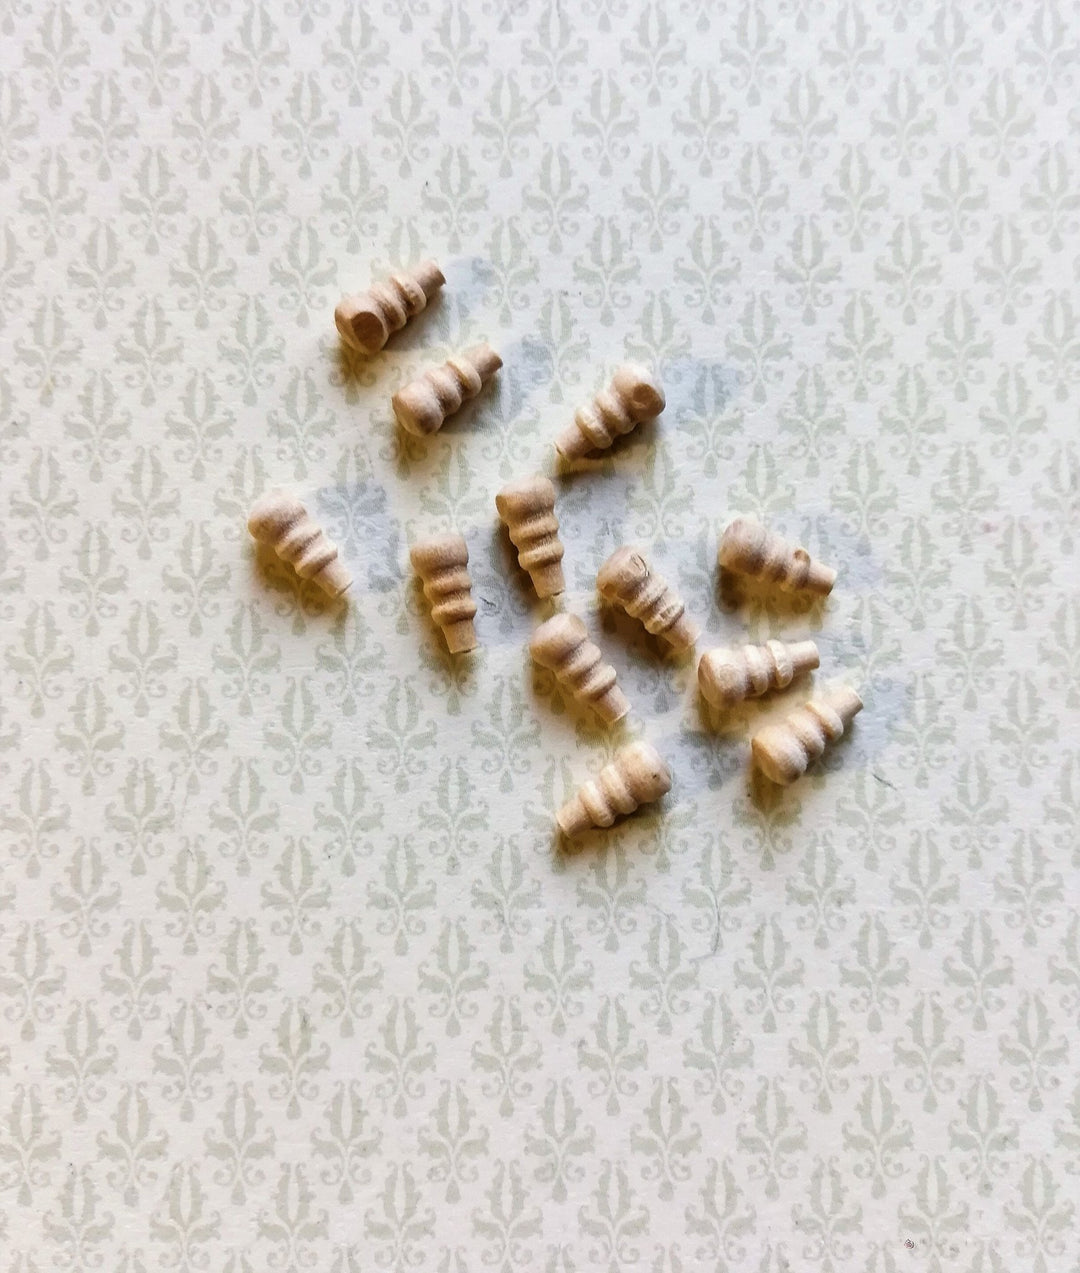 Dollhouse Miniature Wood Knobs or Drawer Pulls Small 12 Pieces 1:12 Scale 8 mm - Miniature Crush